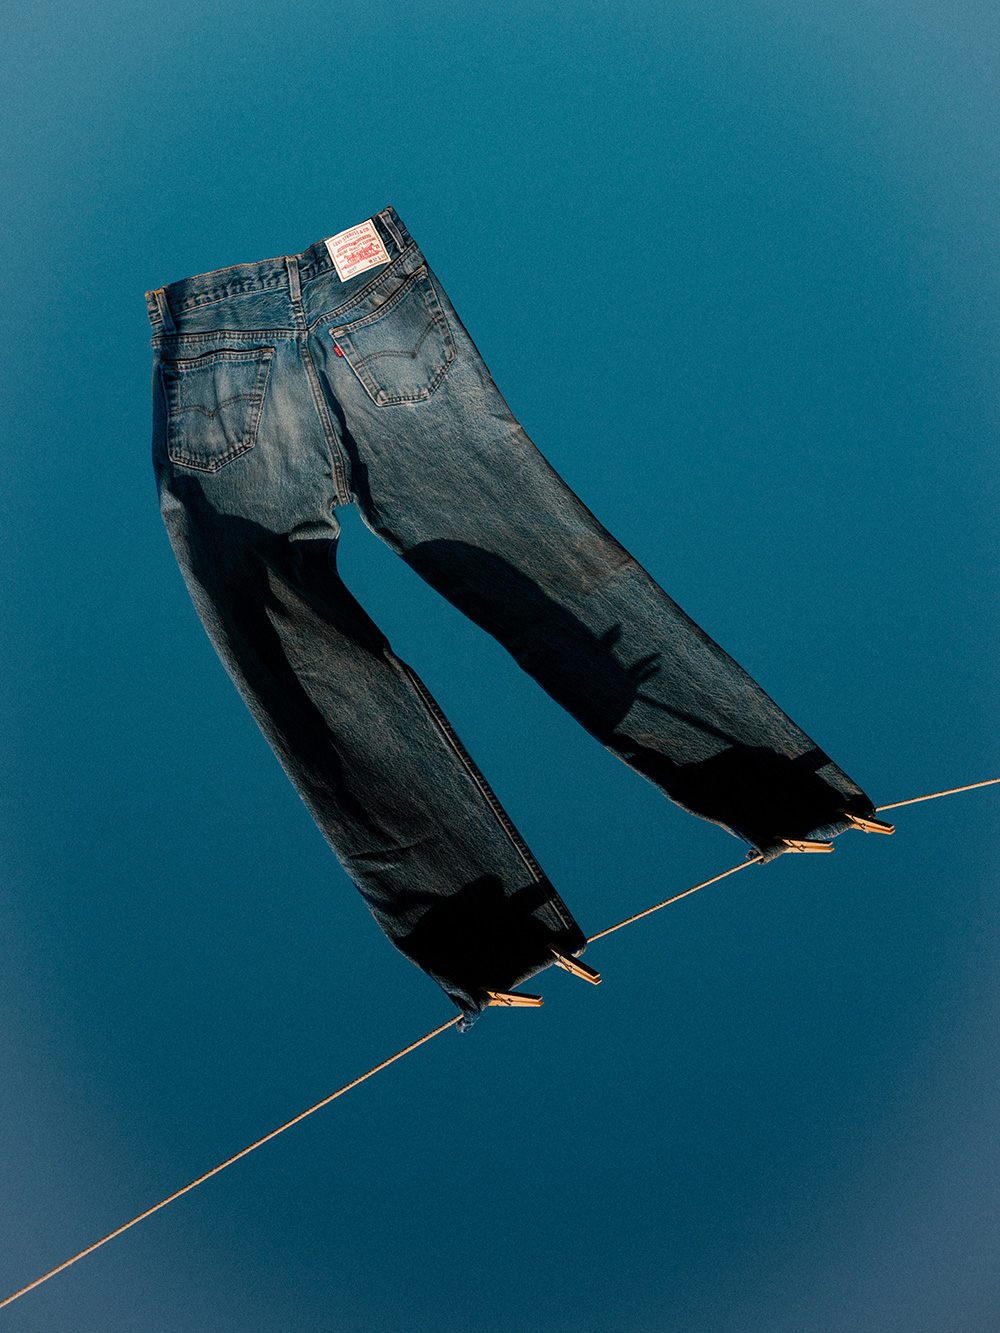 A photo of Levi's 501 jeans